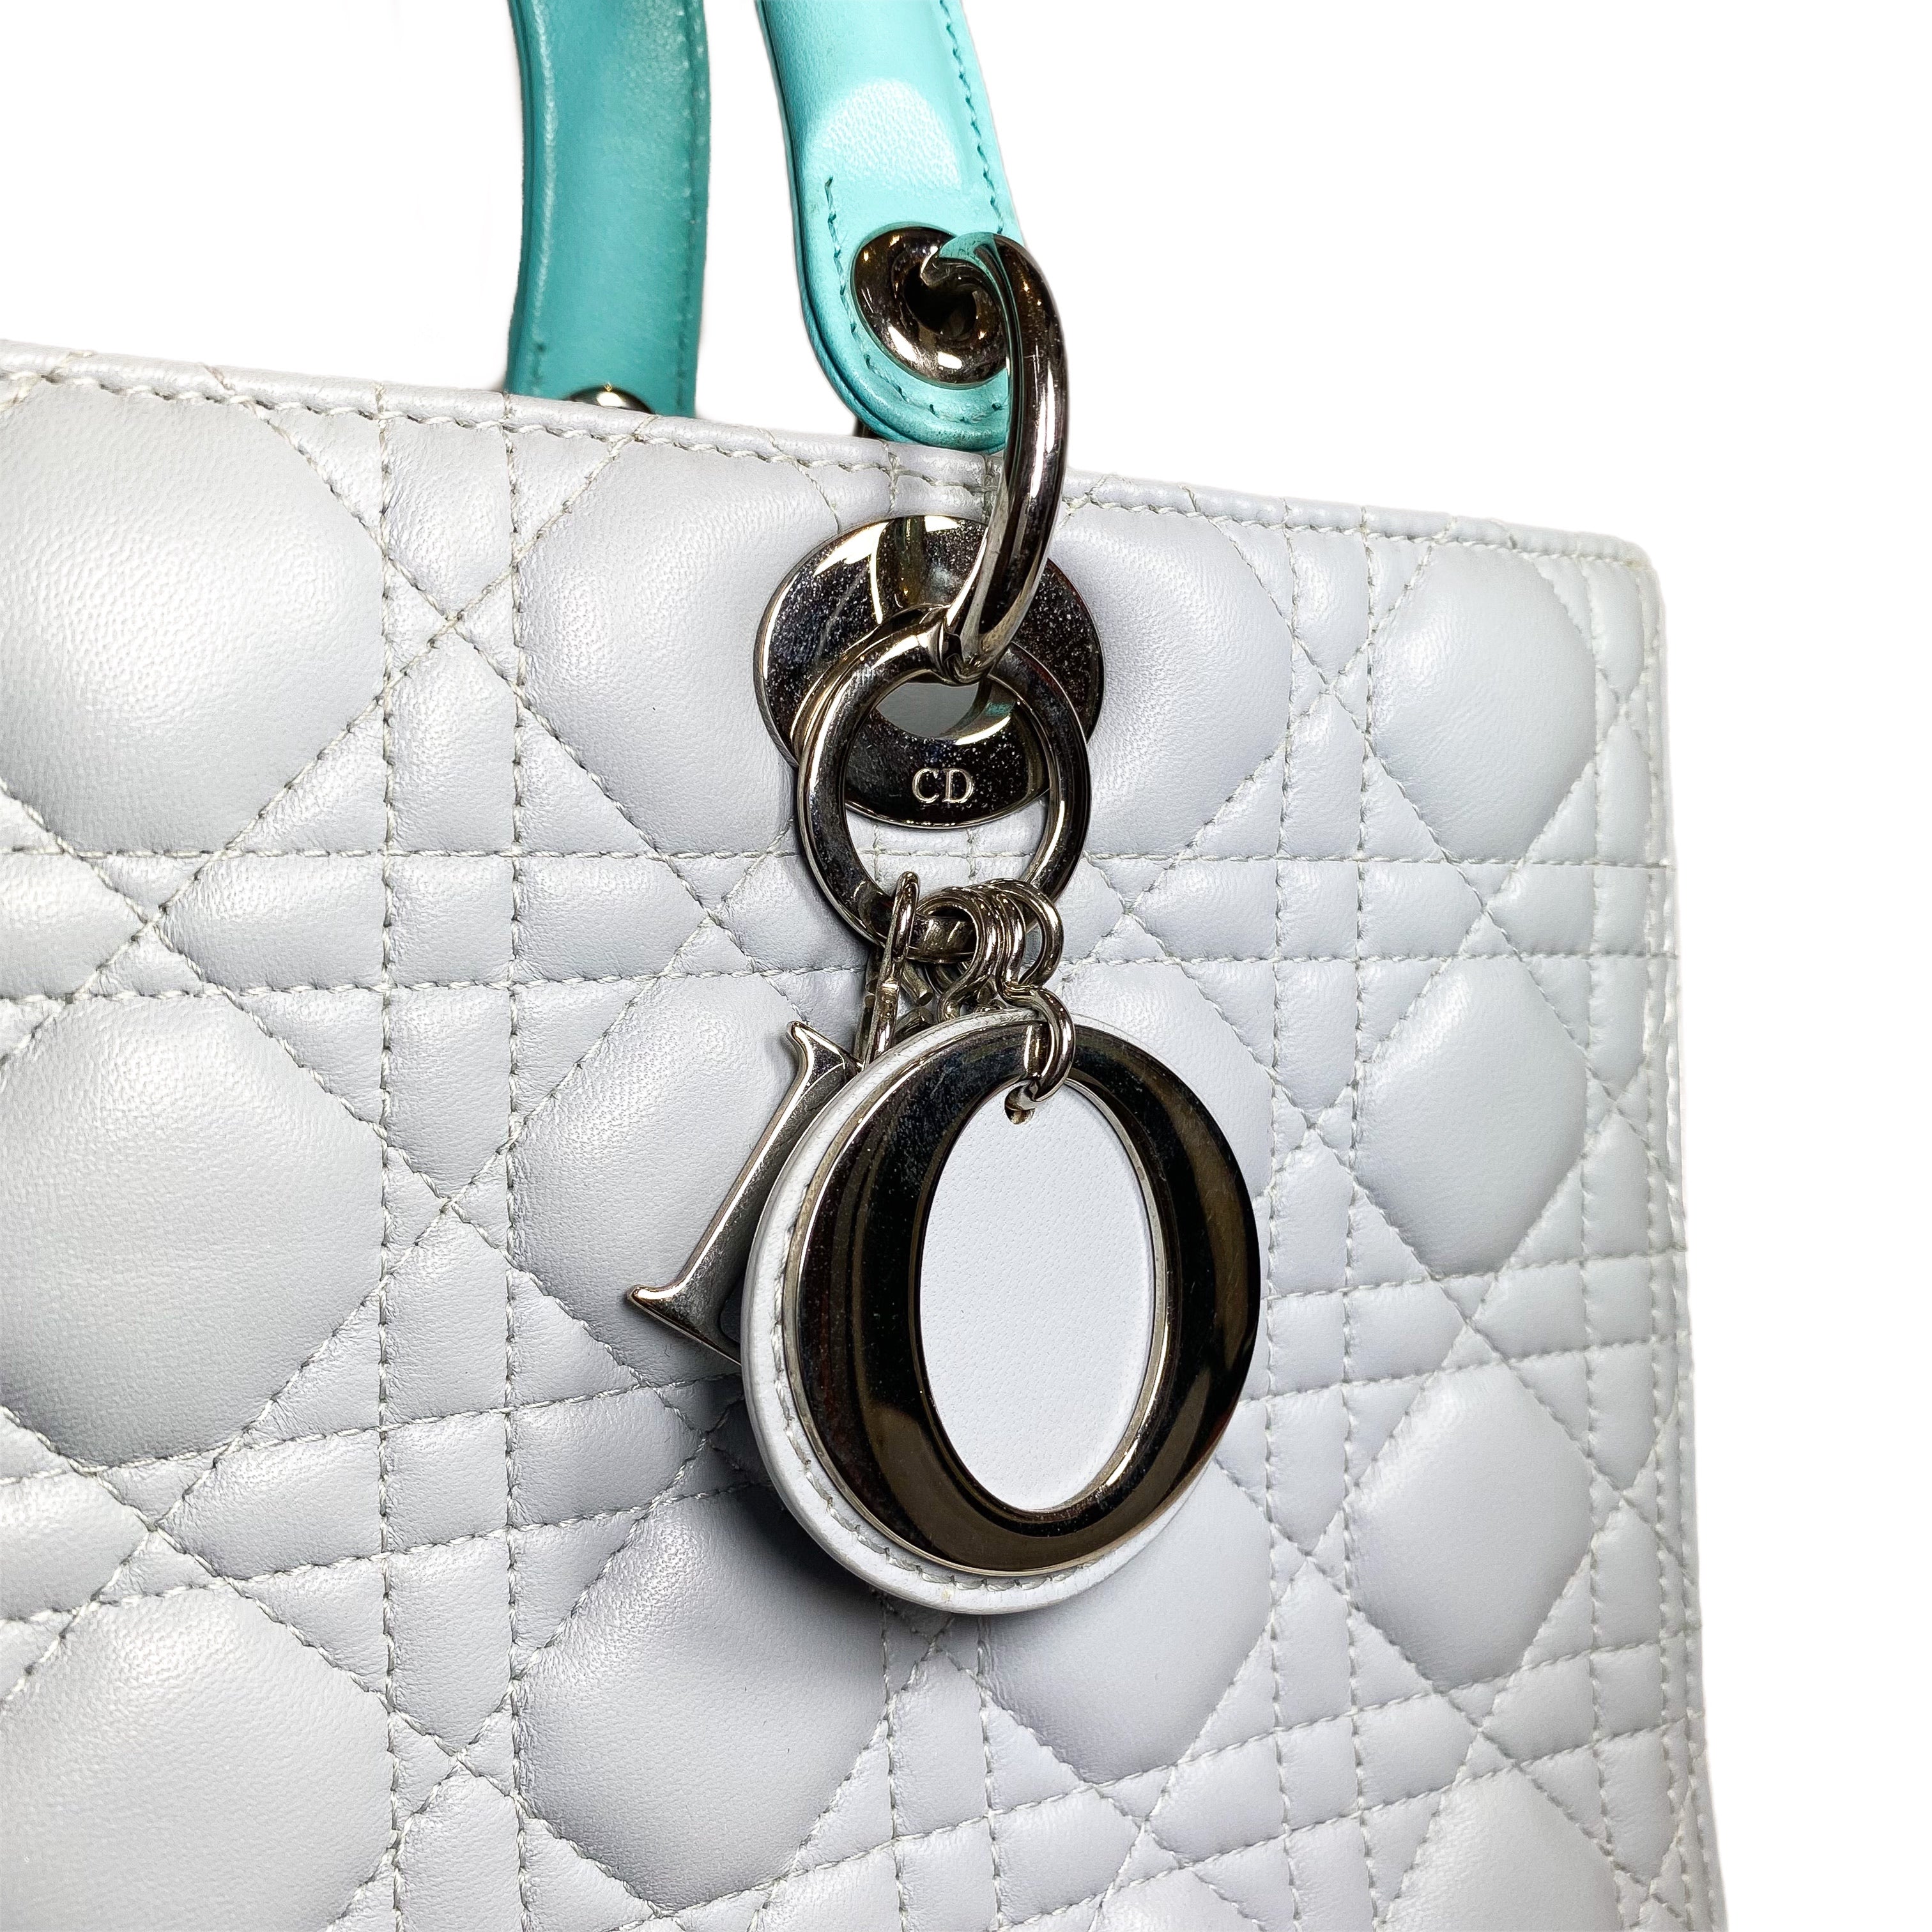 Dior Turquoise Gray Large Lady Dior